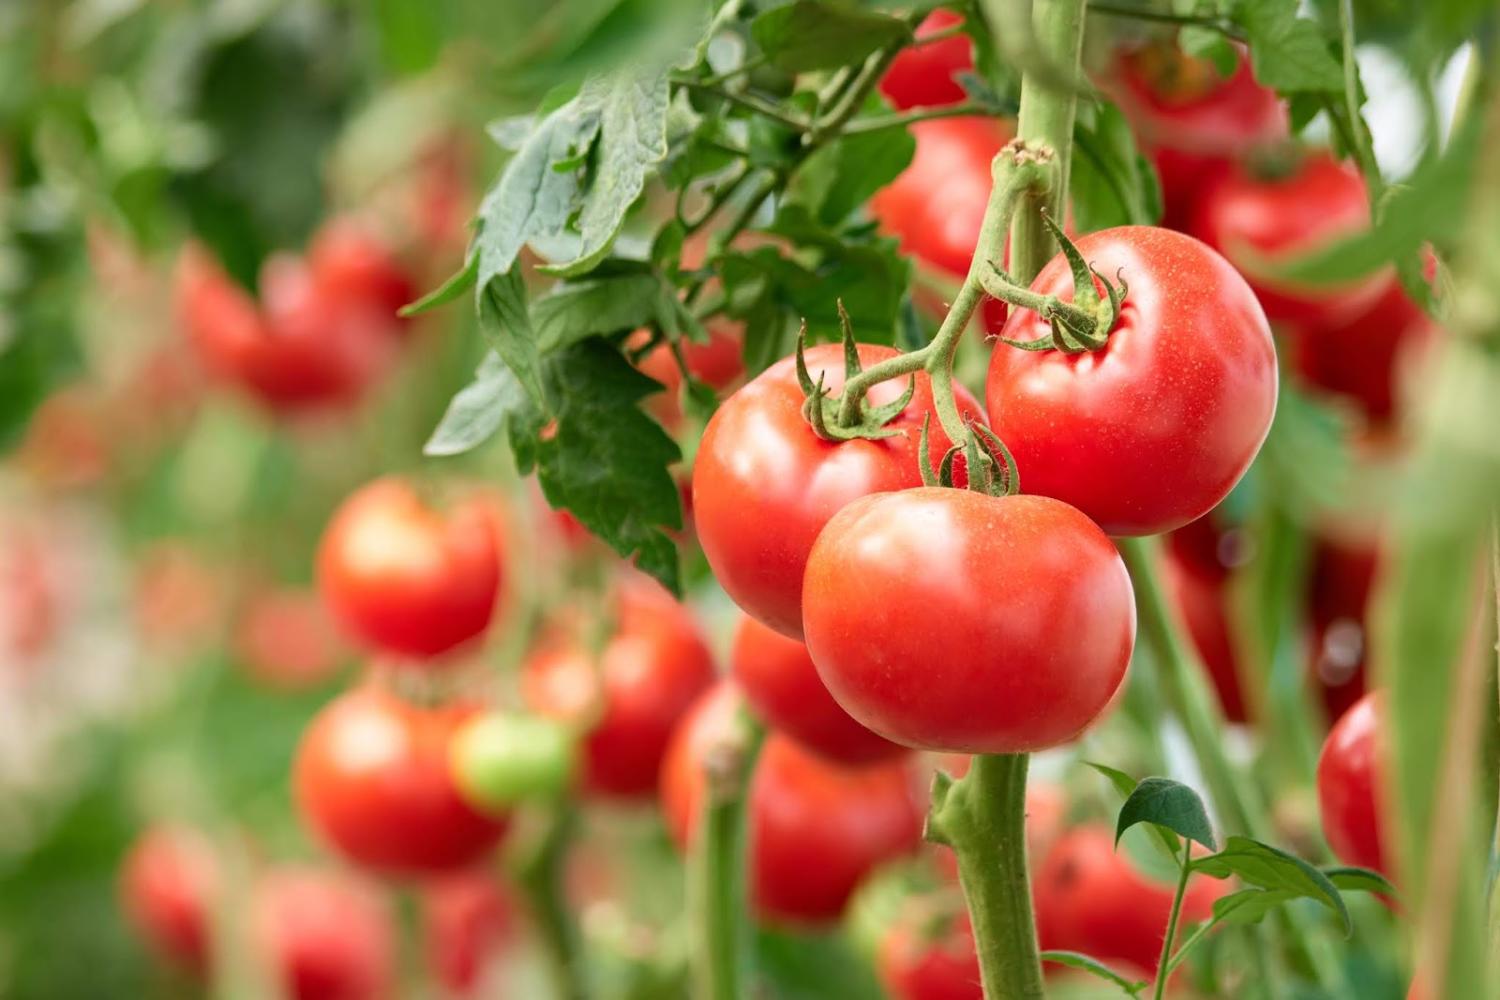 Close up of tomato plants with multiple large red tomatoes.